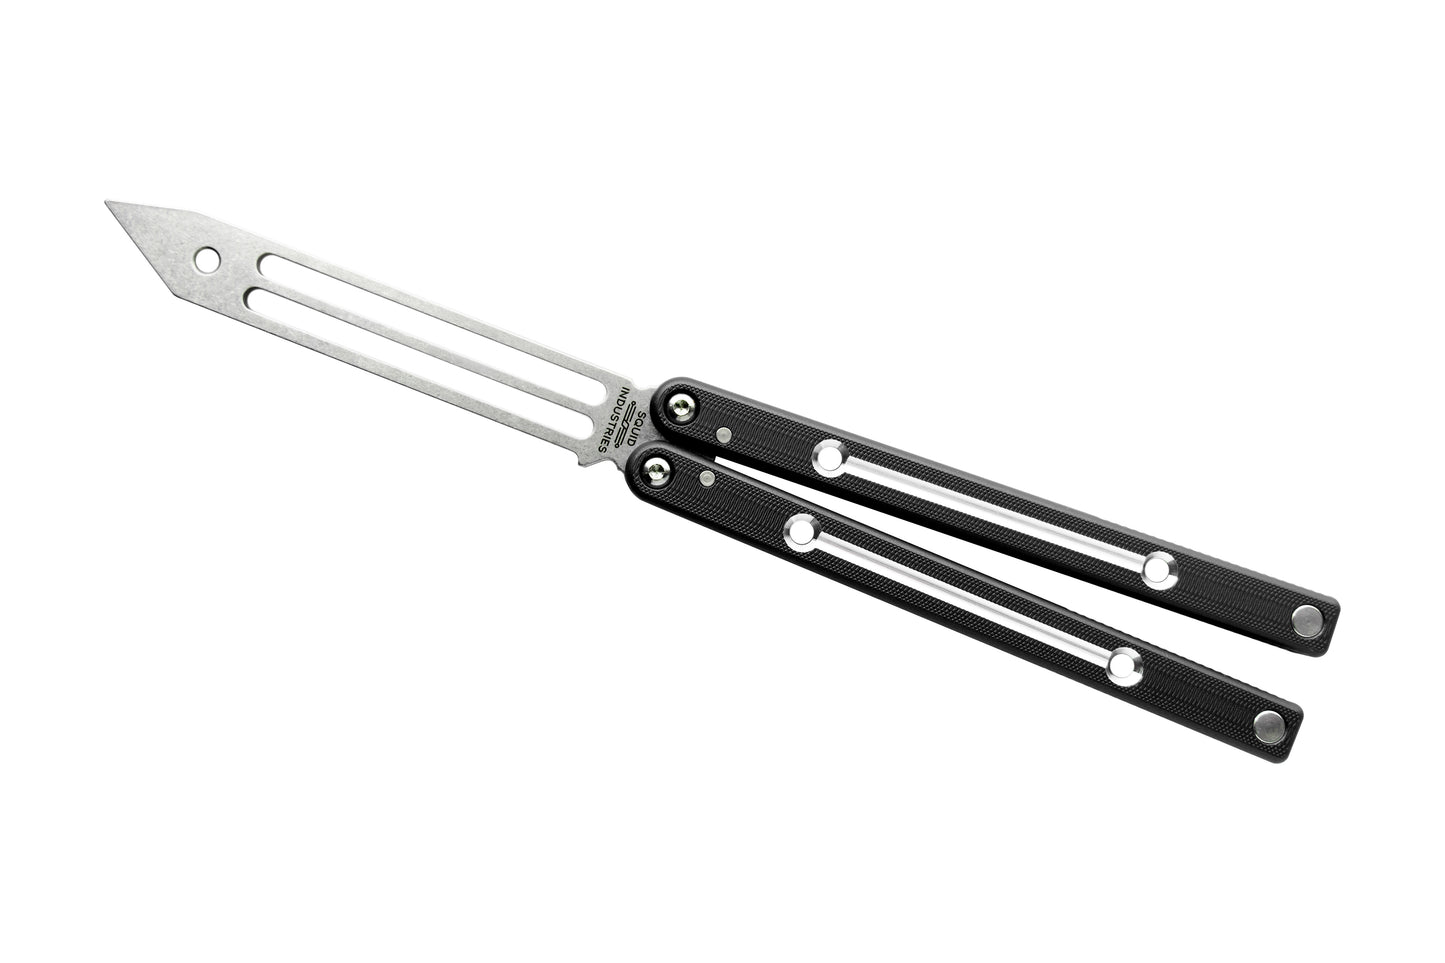 Dual-Tone Black Clearance Blemished Squidtrainer V4 Balisong Butterfly Knife Trainer 